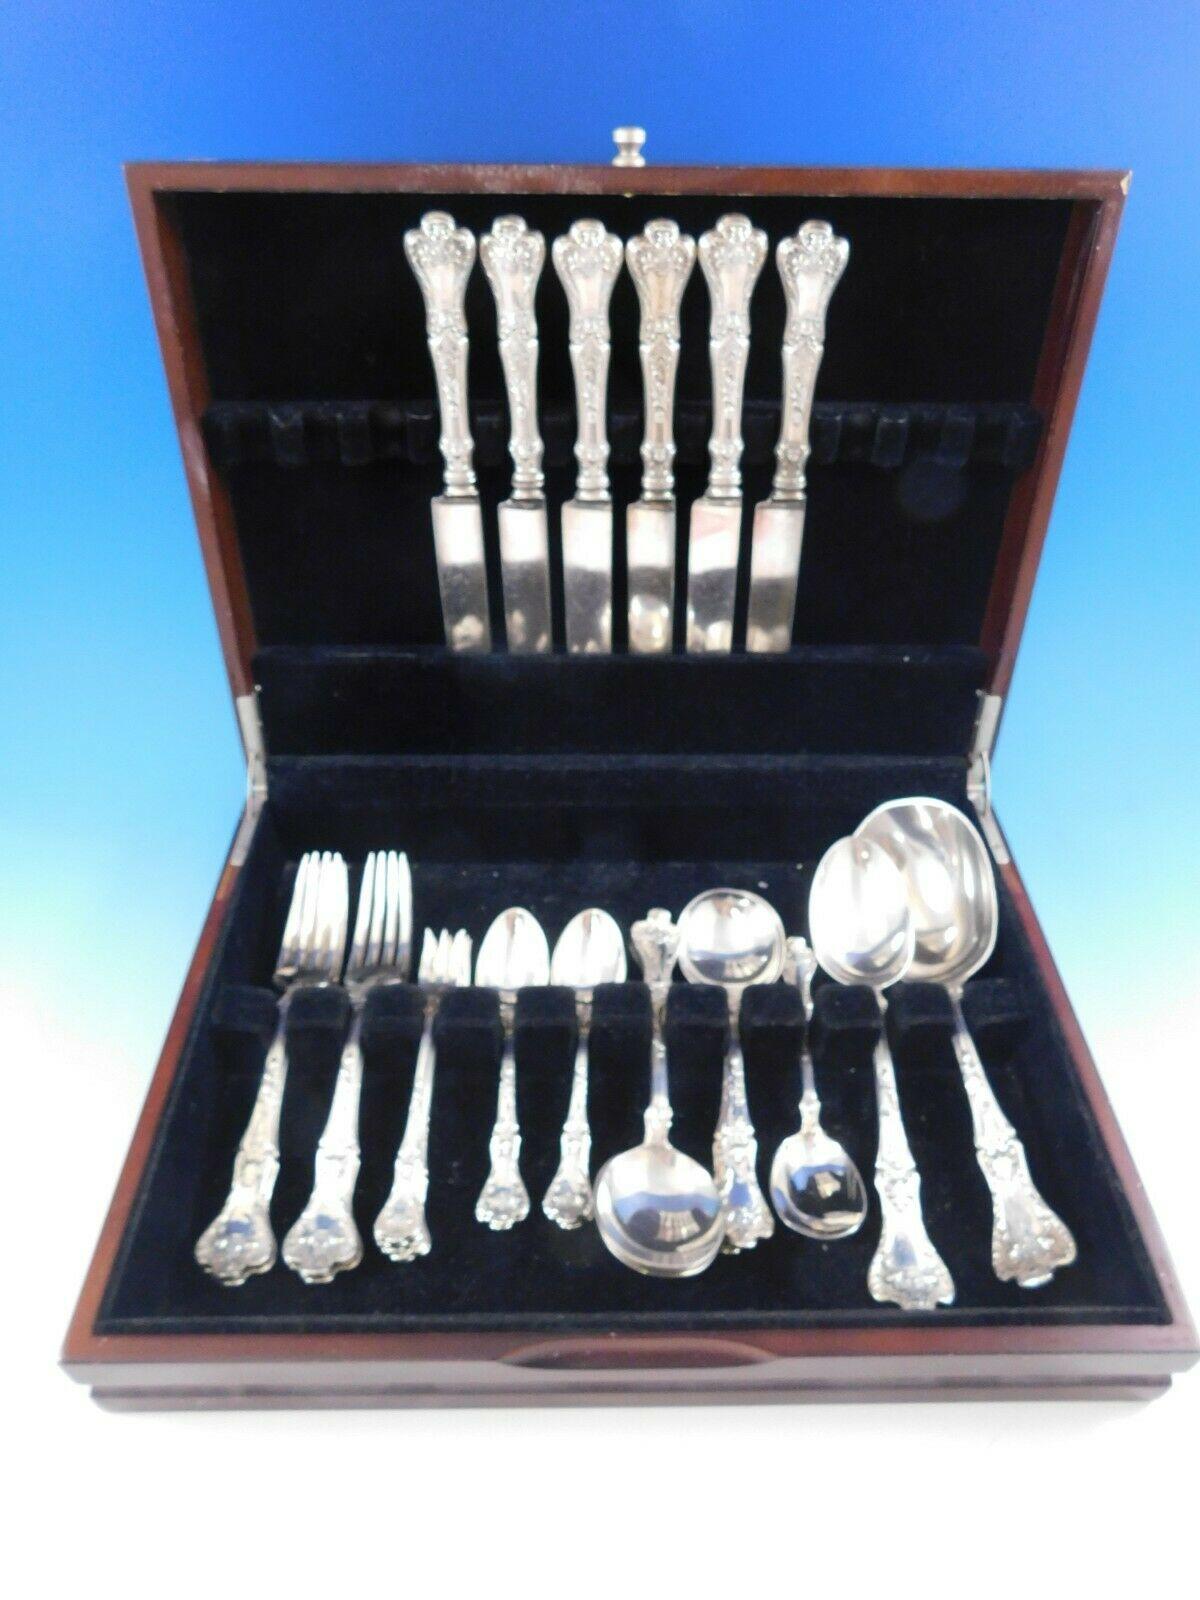 Dinner size patrician by Gorham sterling silver flatware, 33 pieces. This set includes:

6 dinner size knives with blunt plated blades, 9 3/4